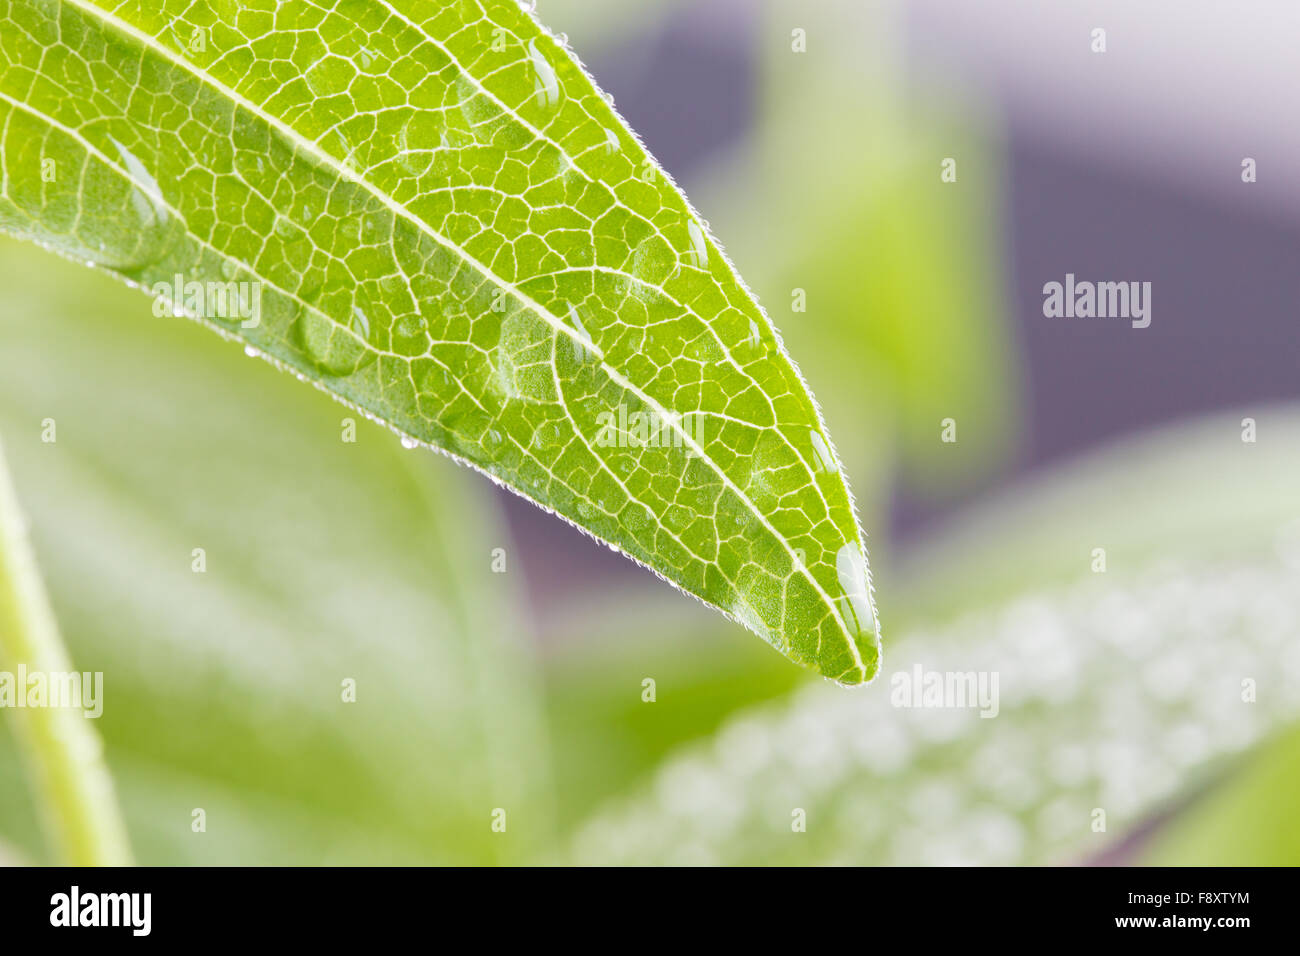 Green leaf with waterdrops closeup Stock Photo